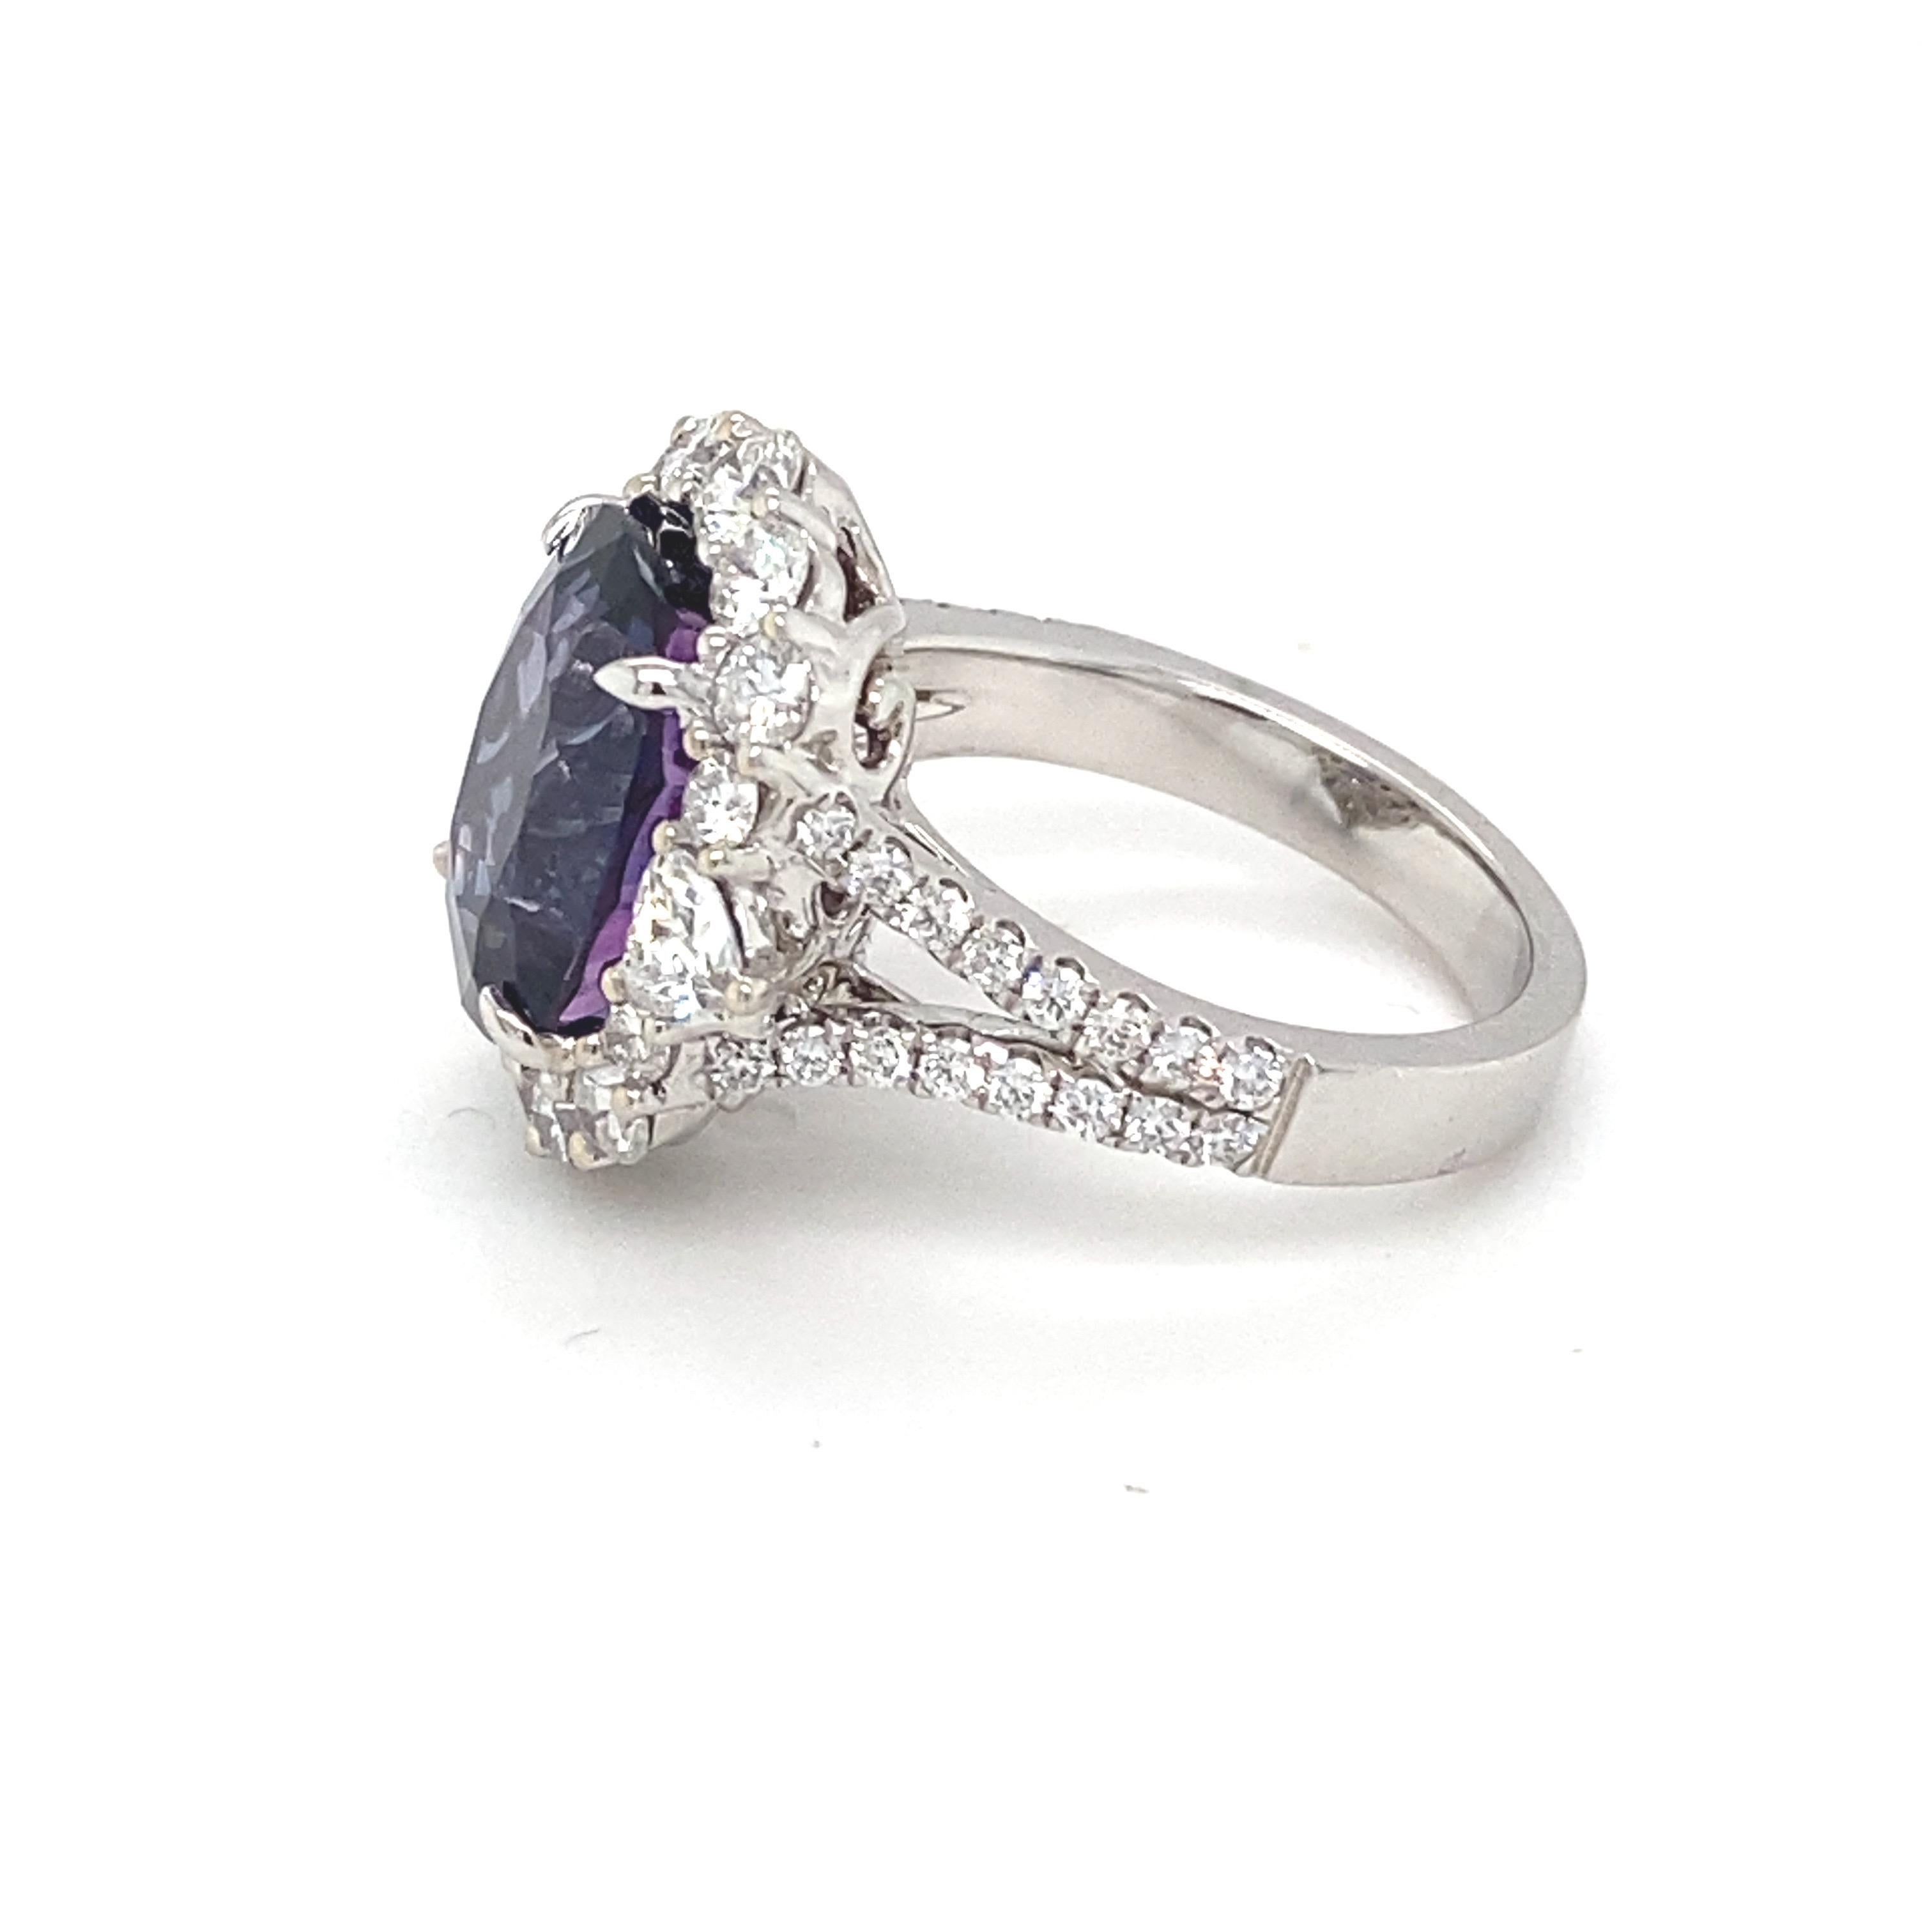 GIA Certified 10.04 Carat Violet Blue Oval Sapphire Diamond Engagement Ring  For Sale 8